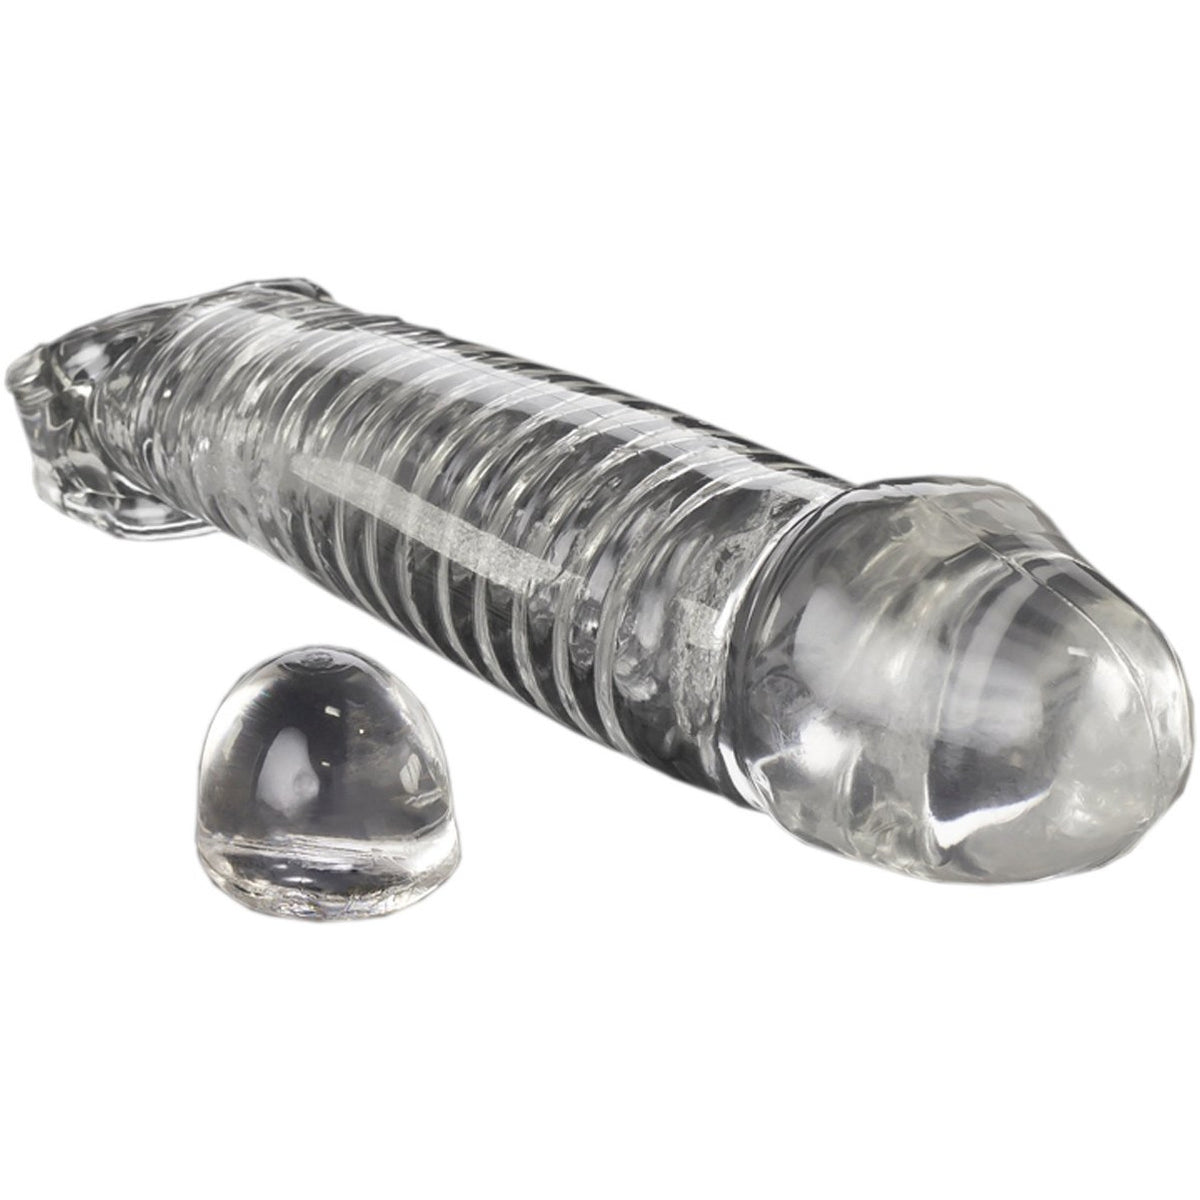 Oxballs Muscle Cocksheath – Penis Extender – Clear